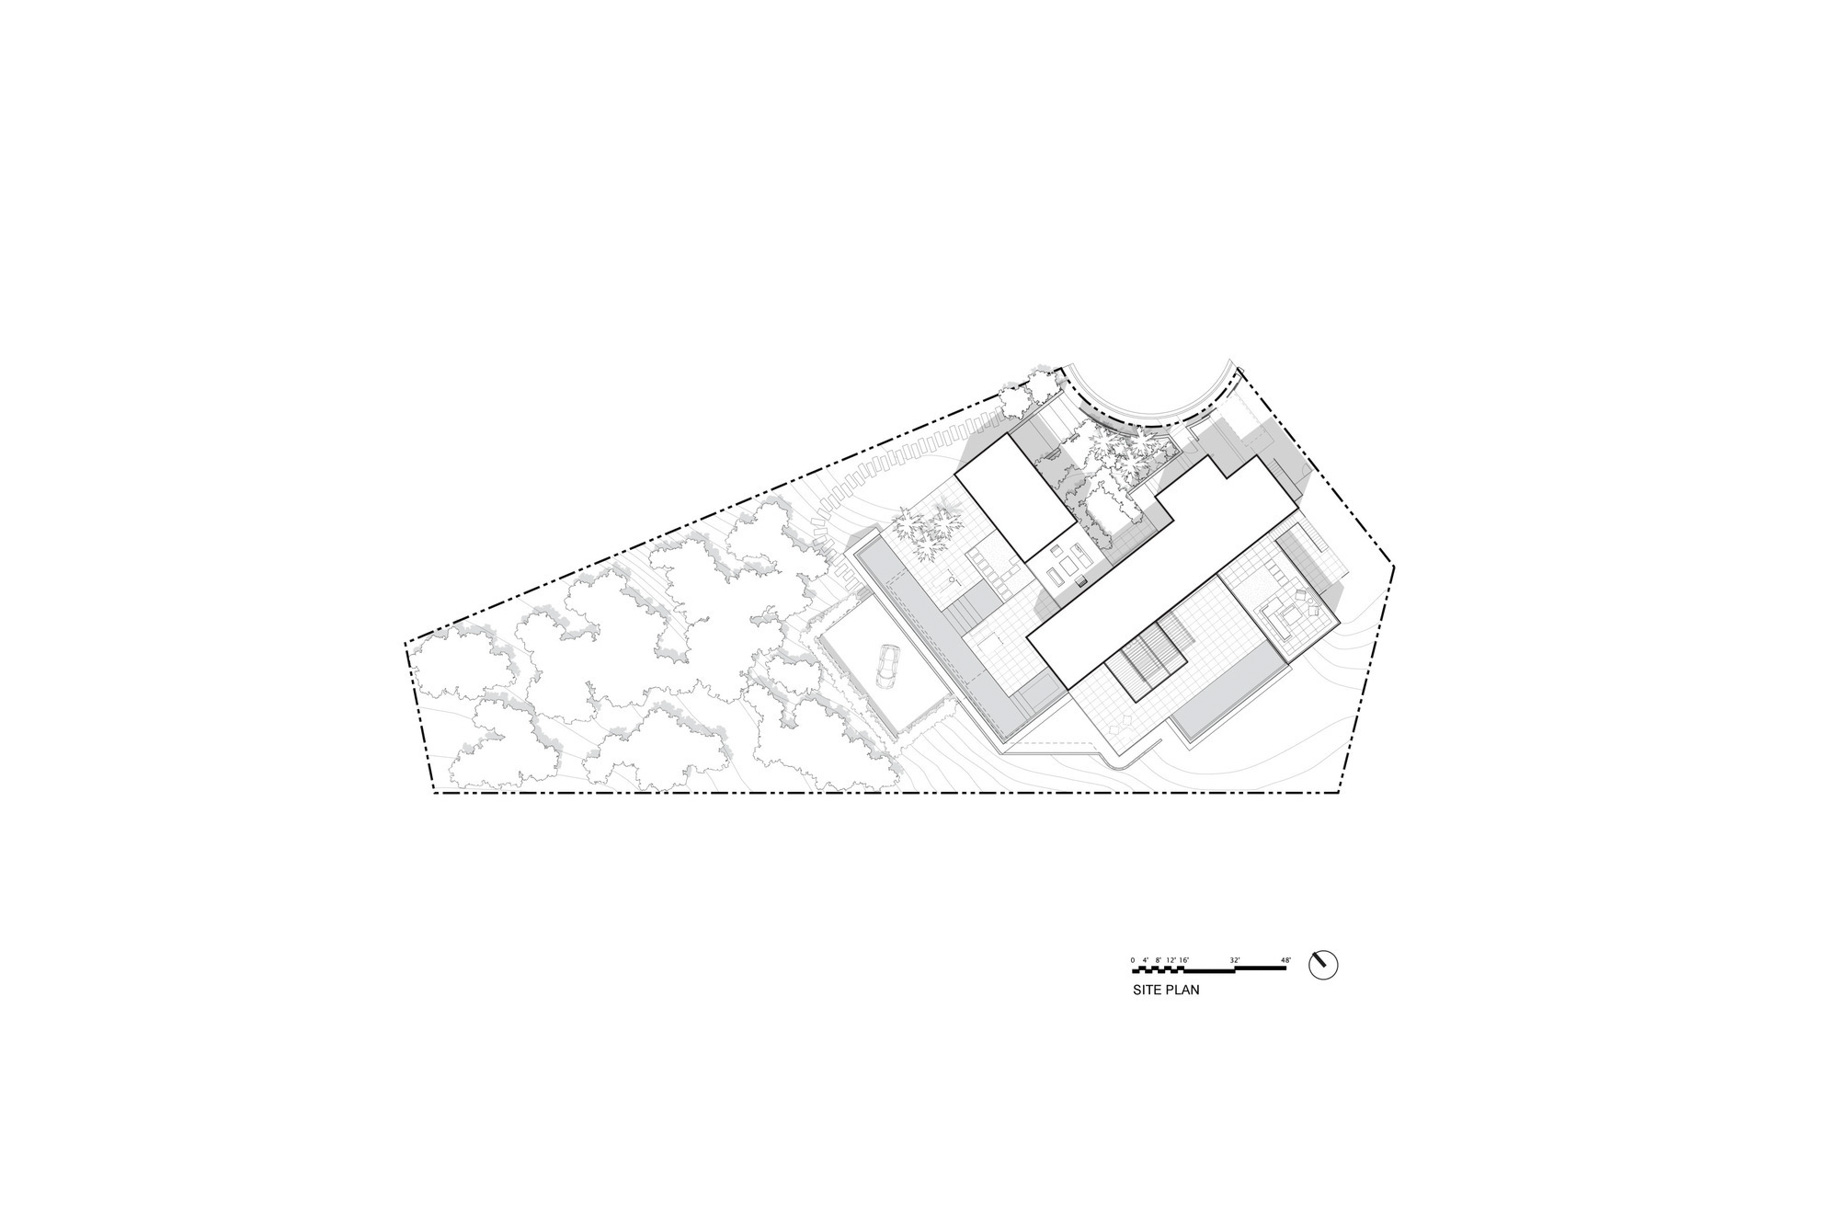 Site Plan - Collywood House - 1301 Collingwood Pl, Los Angeles, CA, USA - West Hollywood Modern Contemporary Home